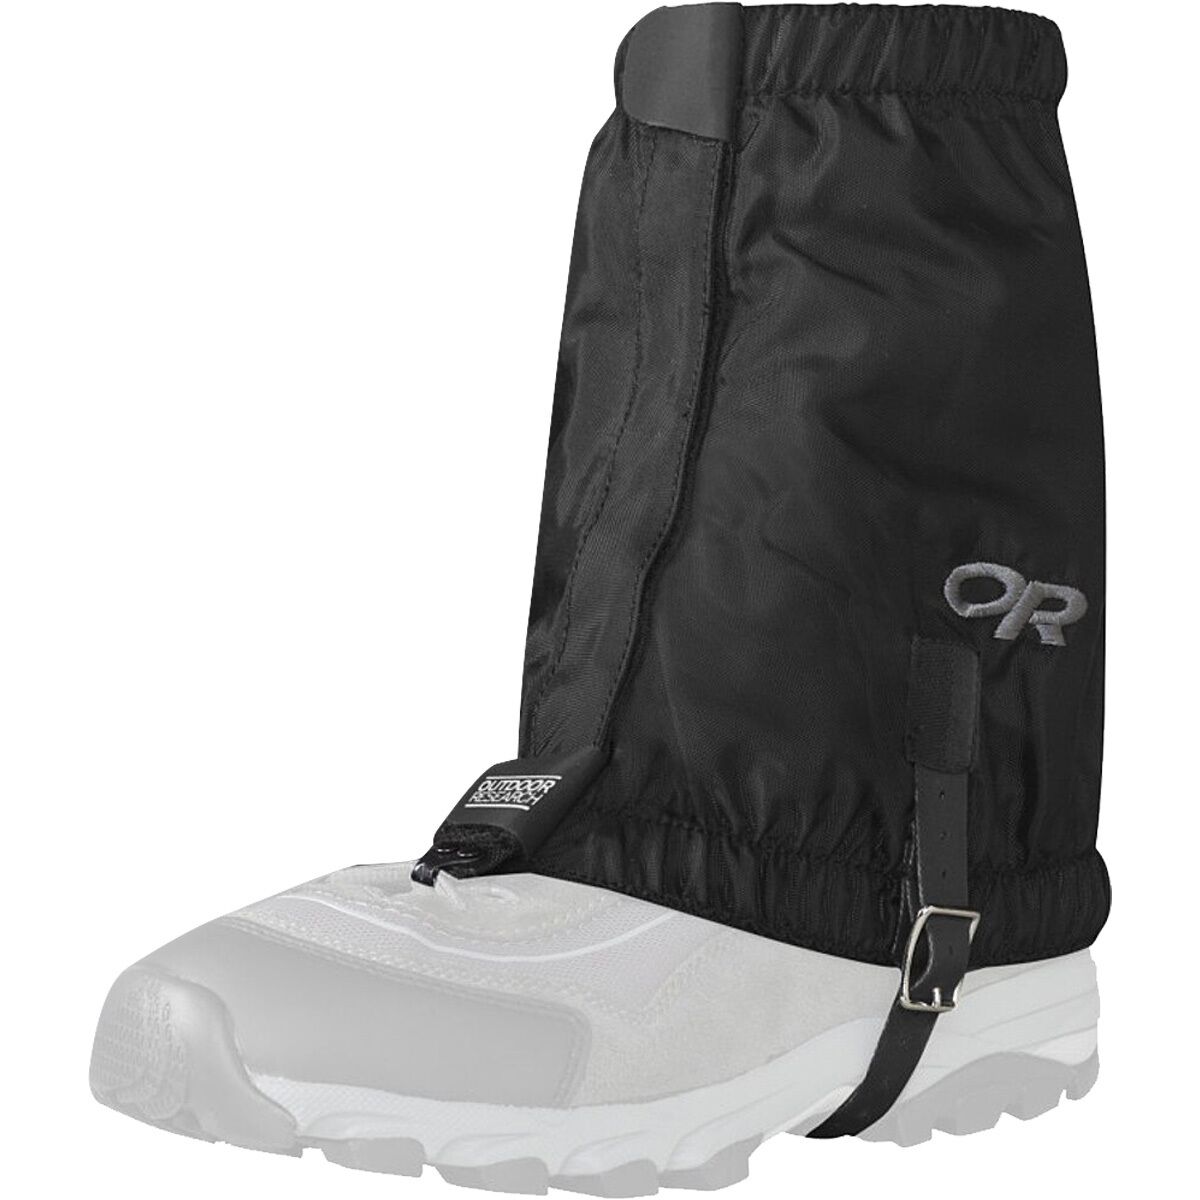 Outdoor Research Rocky Mountain Low Gaiter | Backcountry